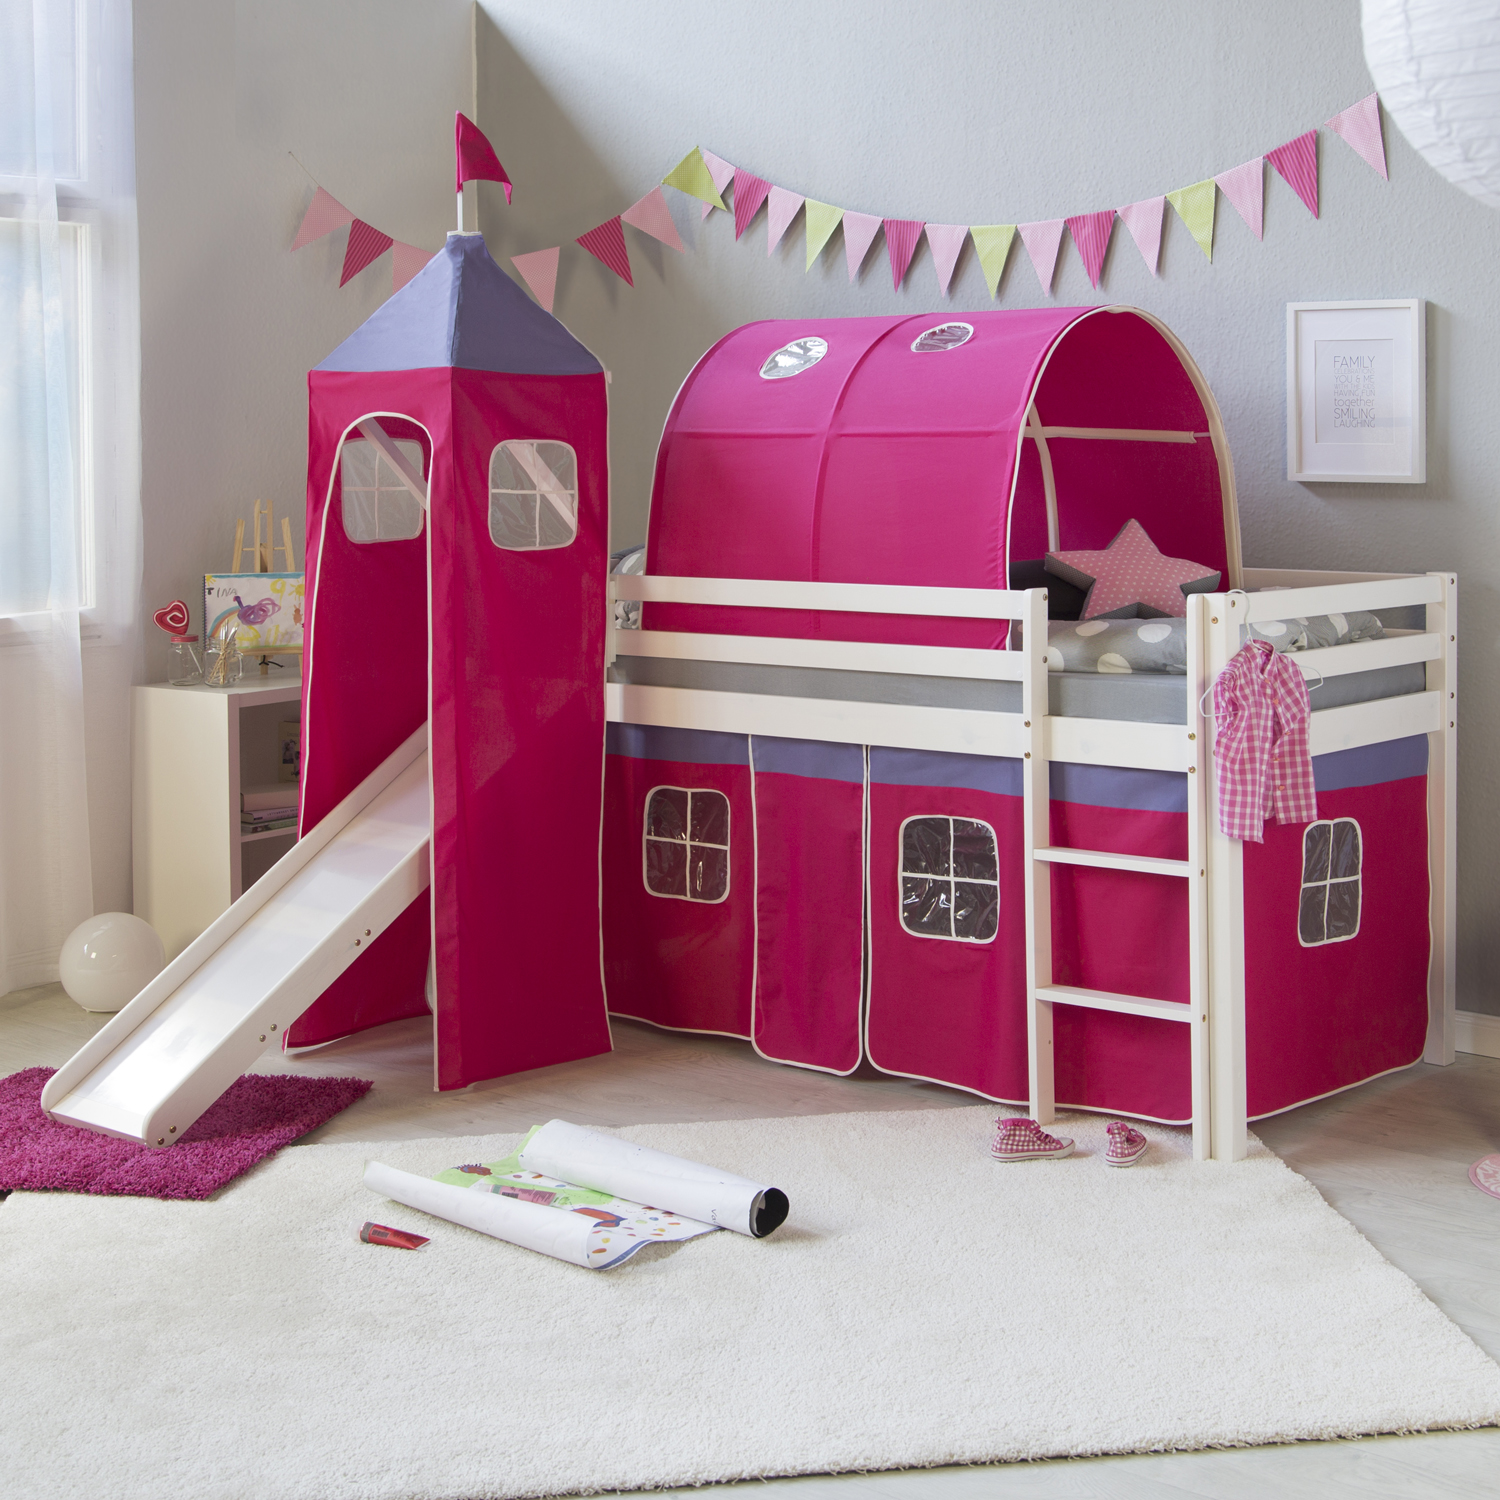 Loftbed 90x200 cm Bunk bed Childrens bed Solid Pine Wood Tower Tunnel Curtain Pink Slide Mattress Slats